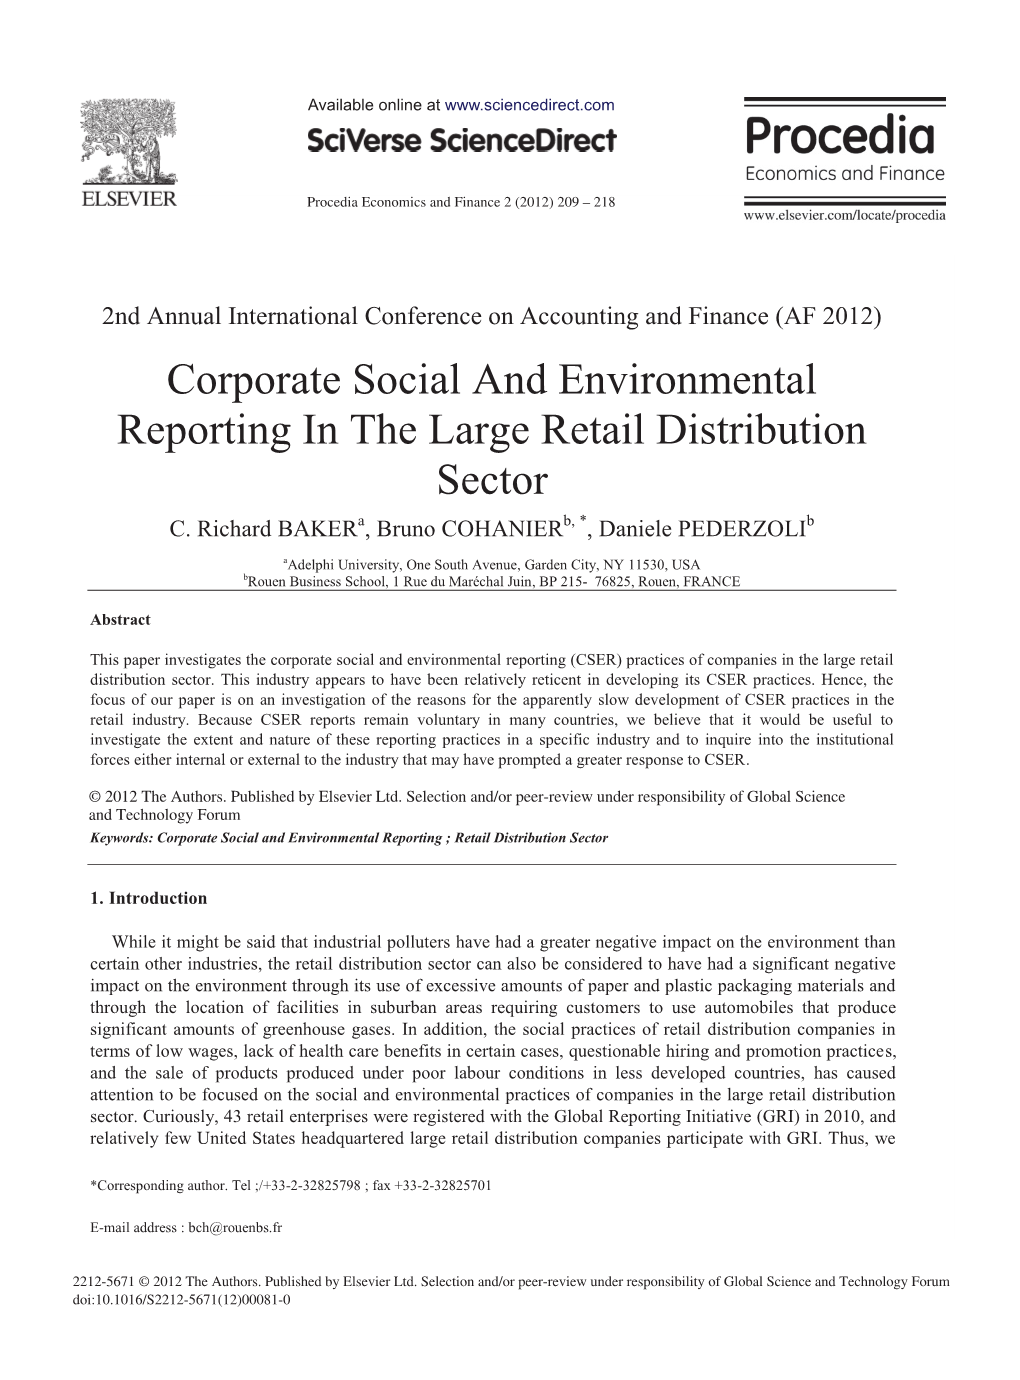 Corporate Social and Environmental Reporting in the Large Retail Distribution Sector C